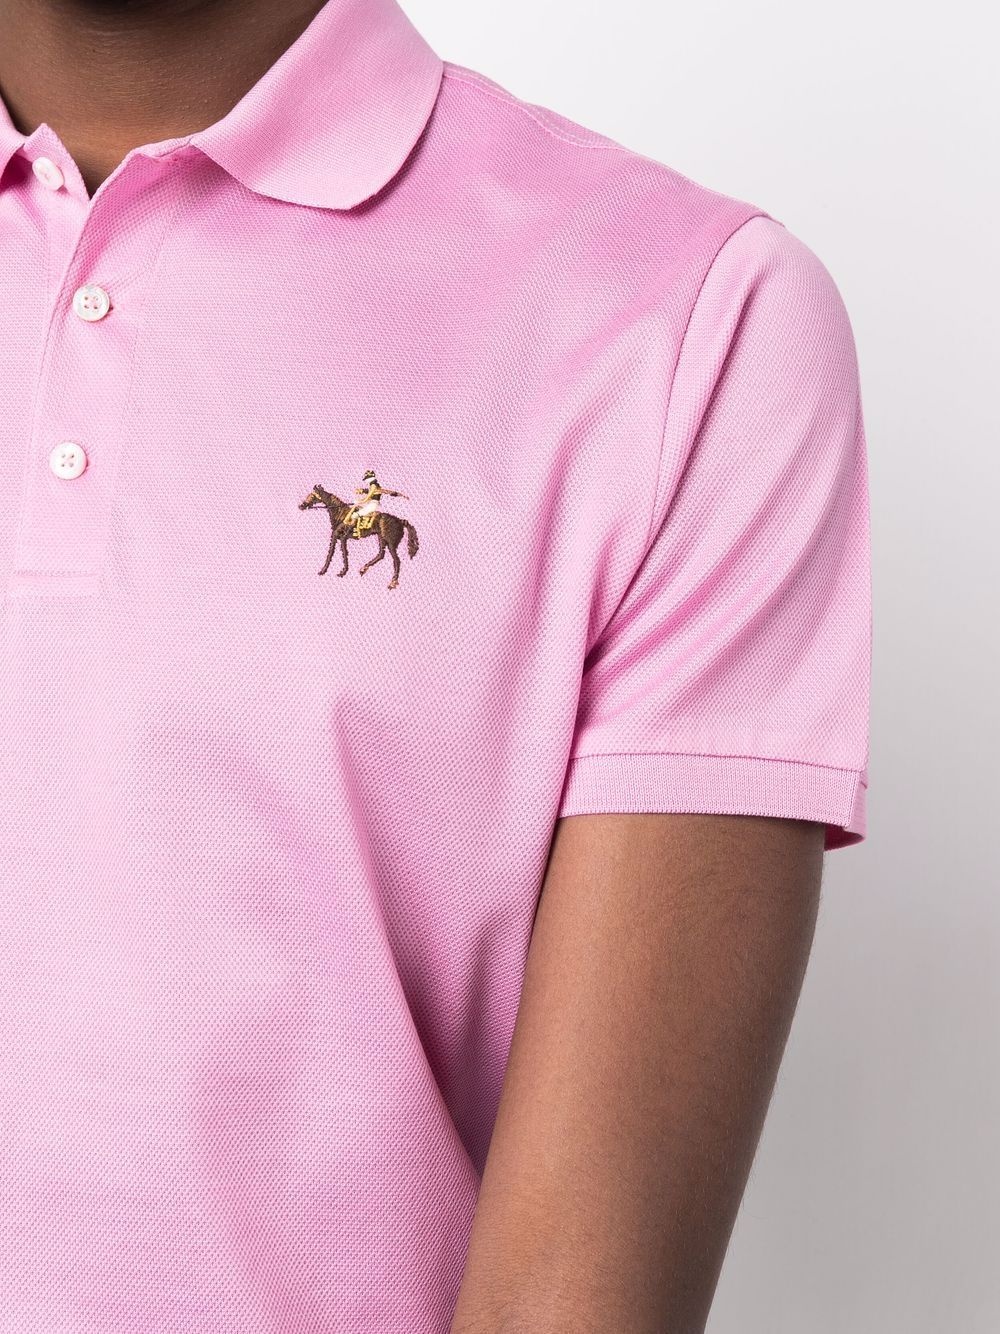 Standing Horse embroidered polo shirt - 8